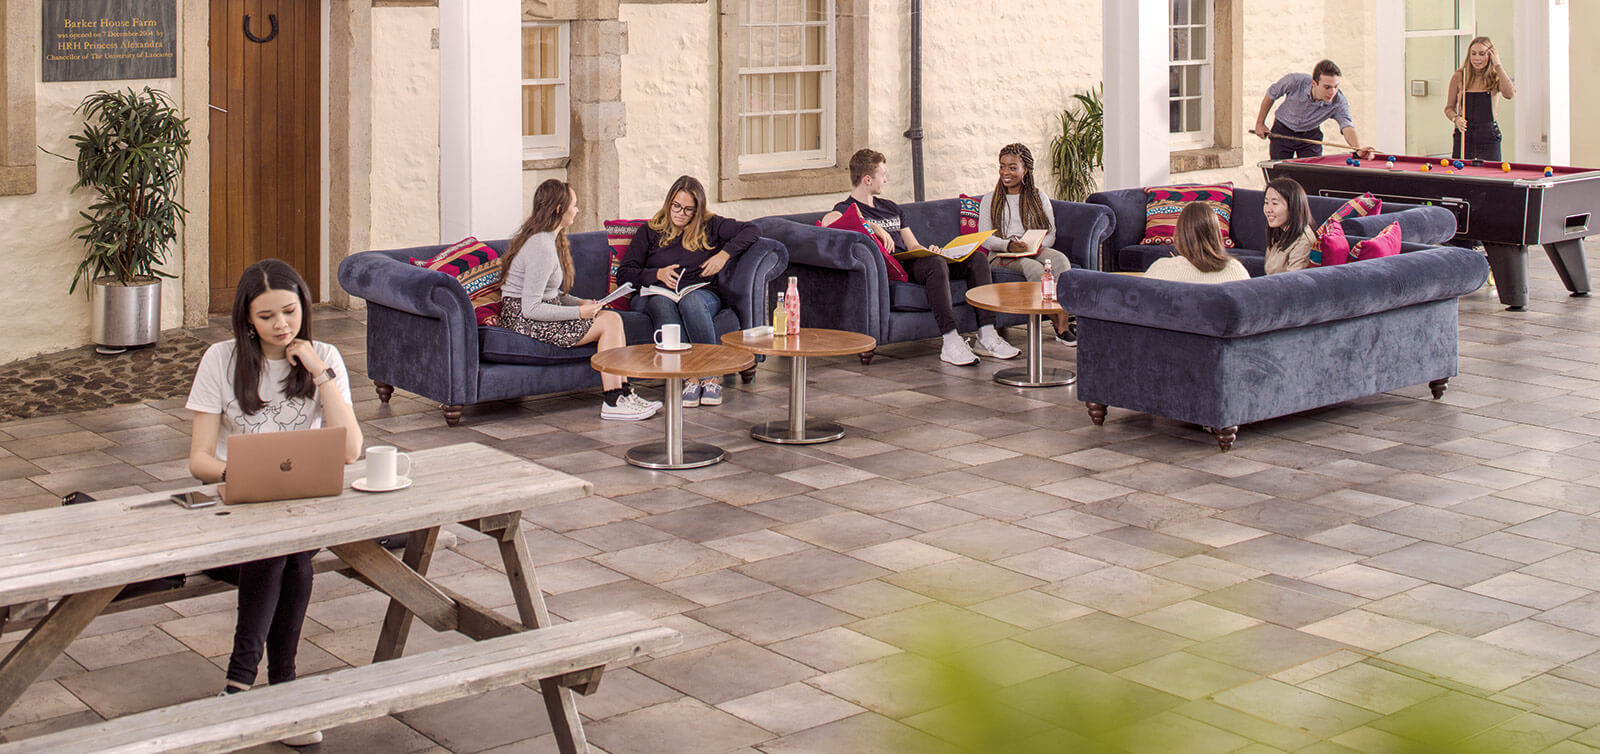 A group of students sitting around benches inside Barker House Farm